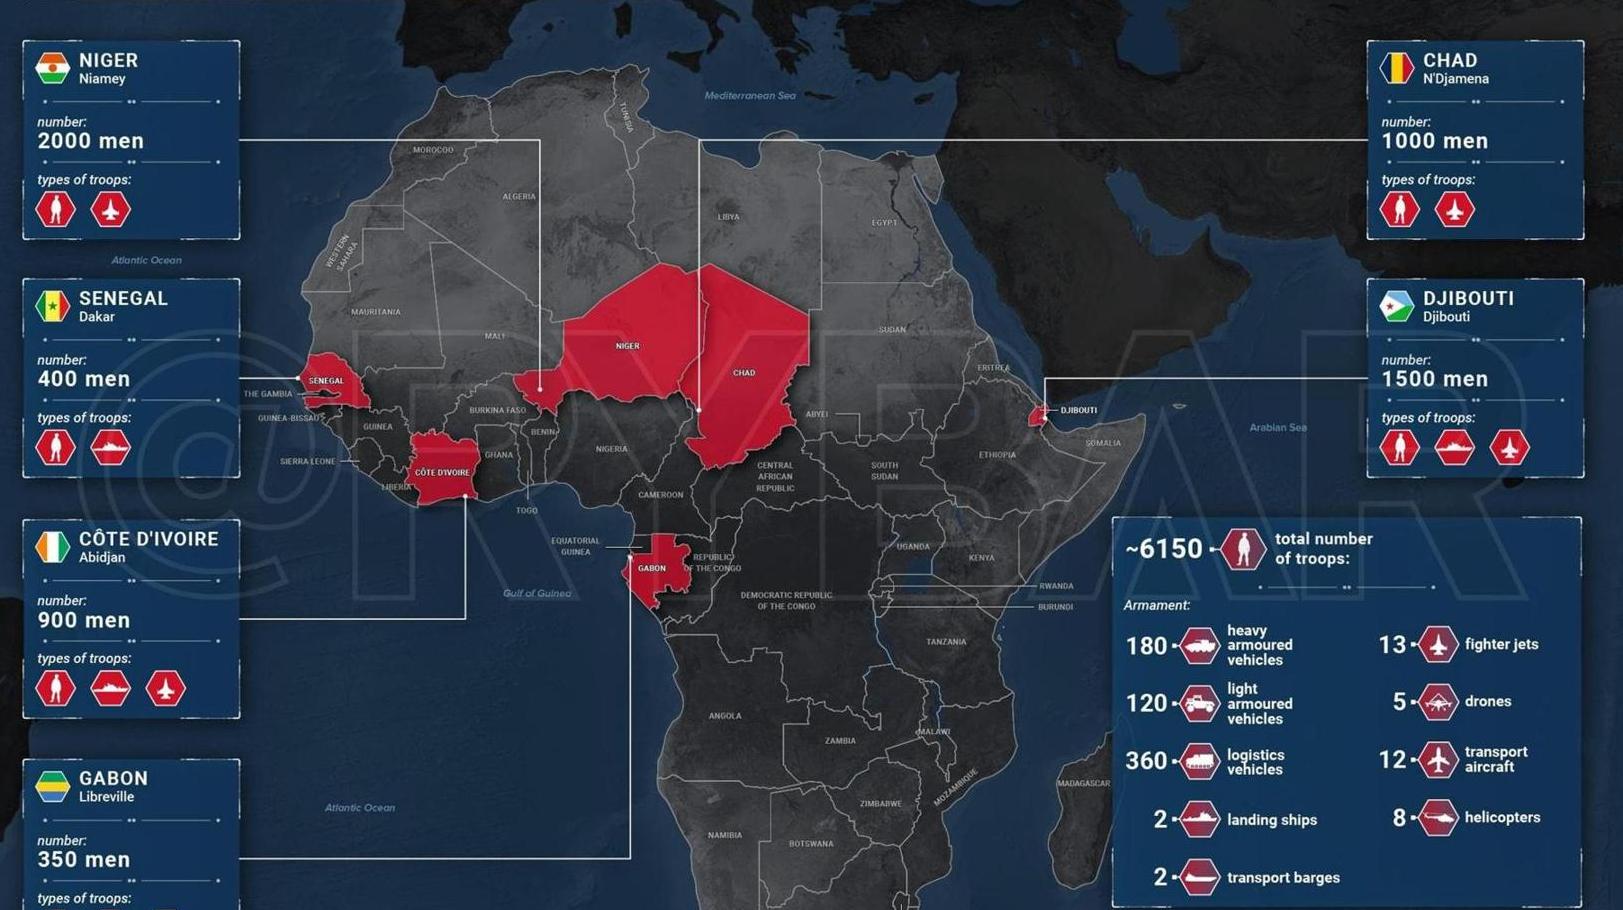 France’s military presence in Africa